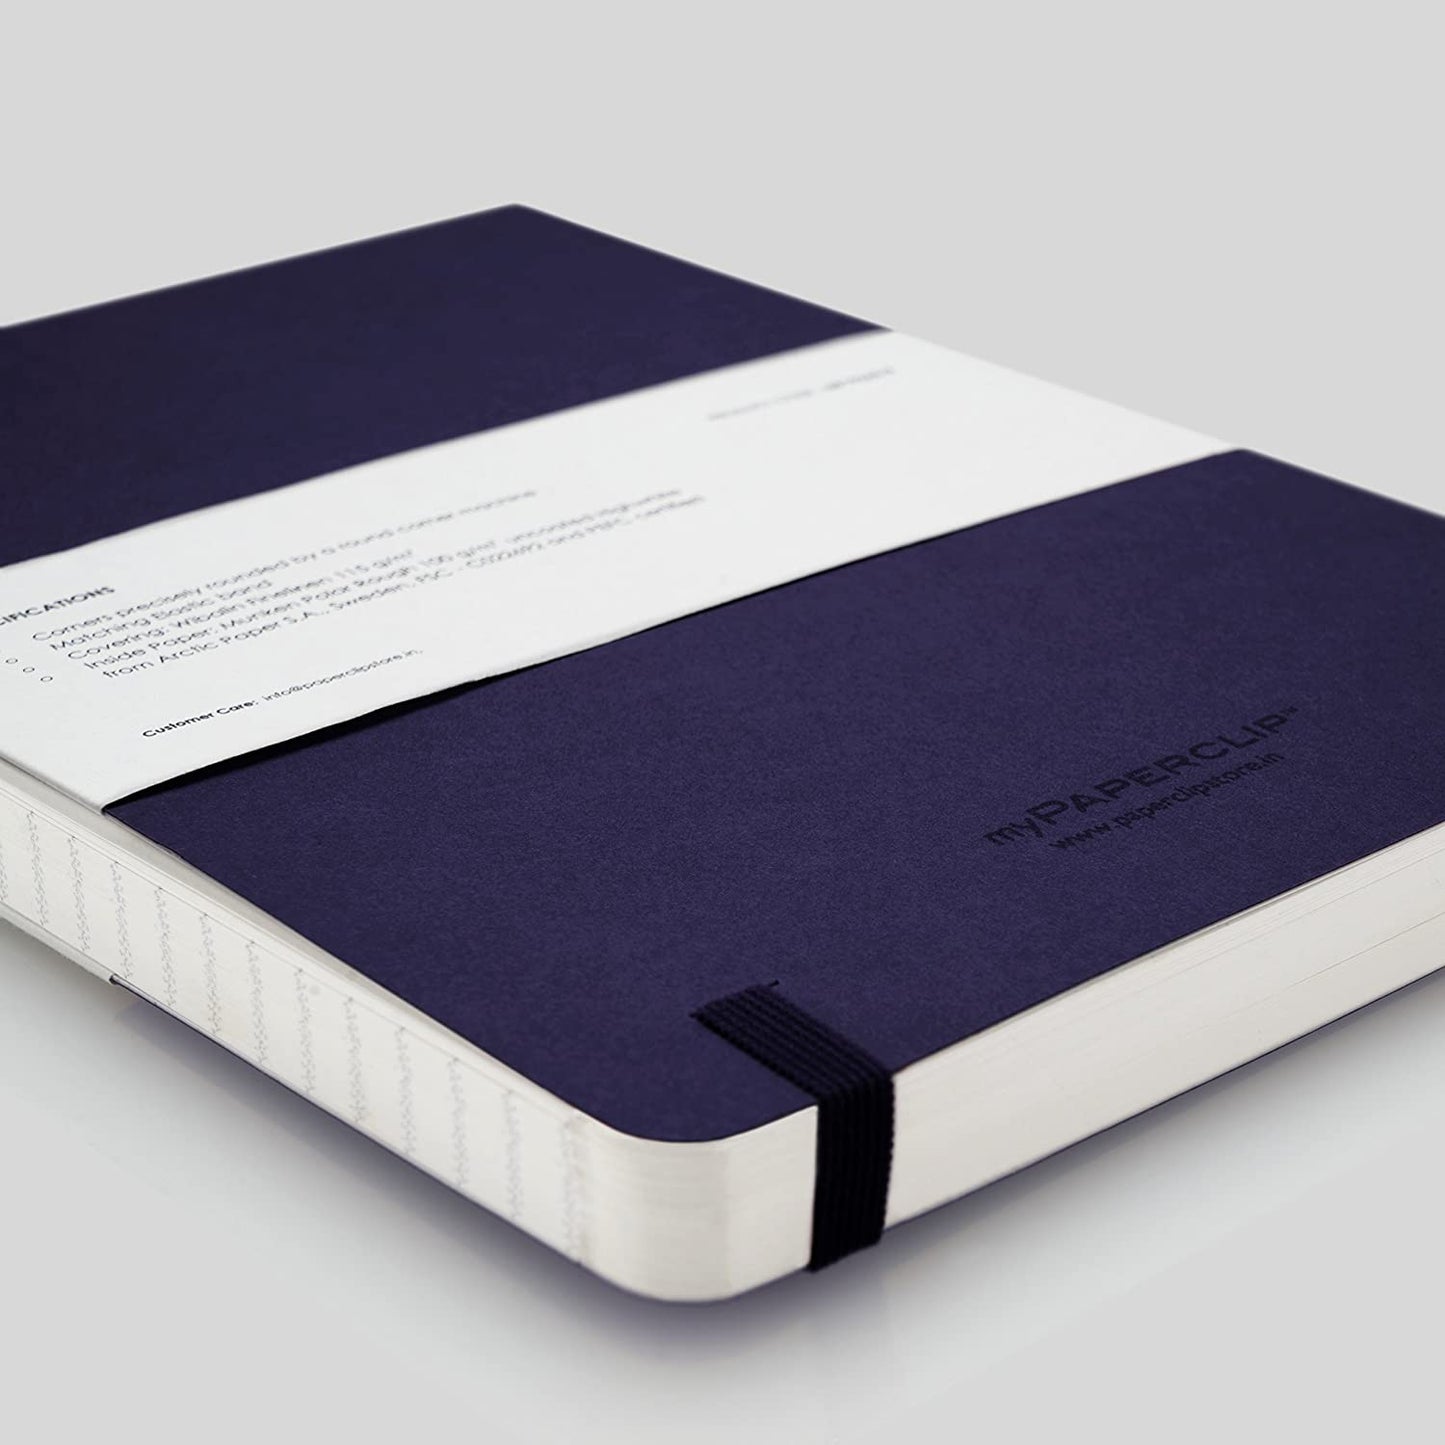 Mypaperclip Limited Edition Notebook, A5 (148 X 210 Mm, 5 .83 X 8.27 In.) Checks Lep192A5-C - Aubergine